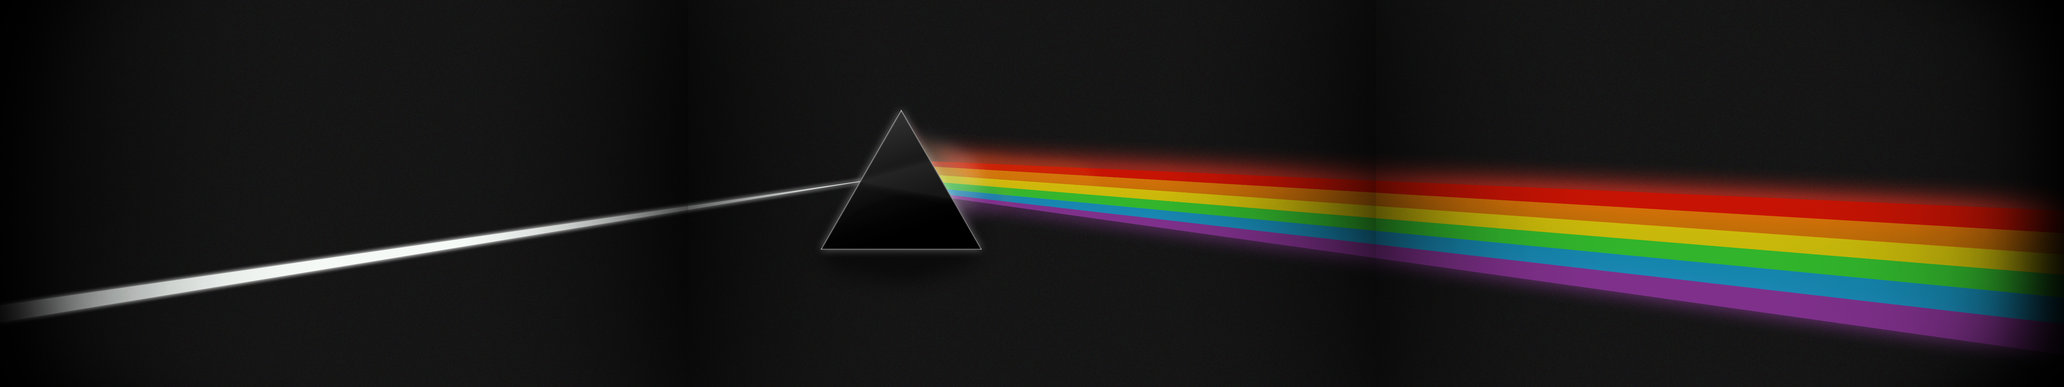 Dark Side of the Moon   Triple Monitor Wallpaper by Dosycool on 2064x387